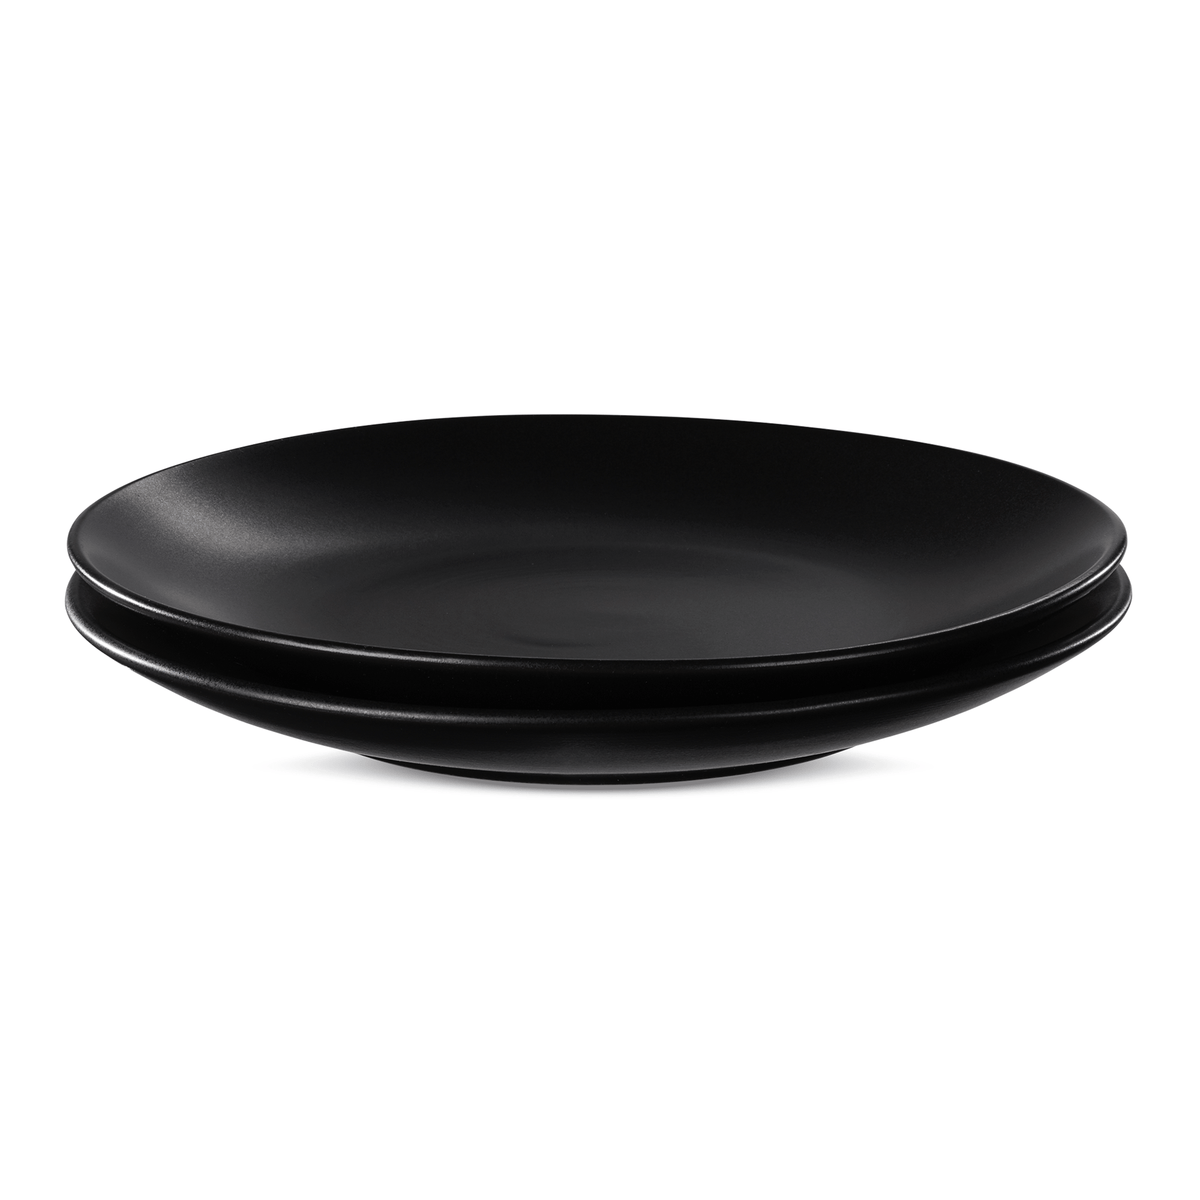 Product photo, a set of 2 stacked black stoneware salad plates.